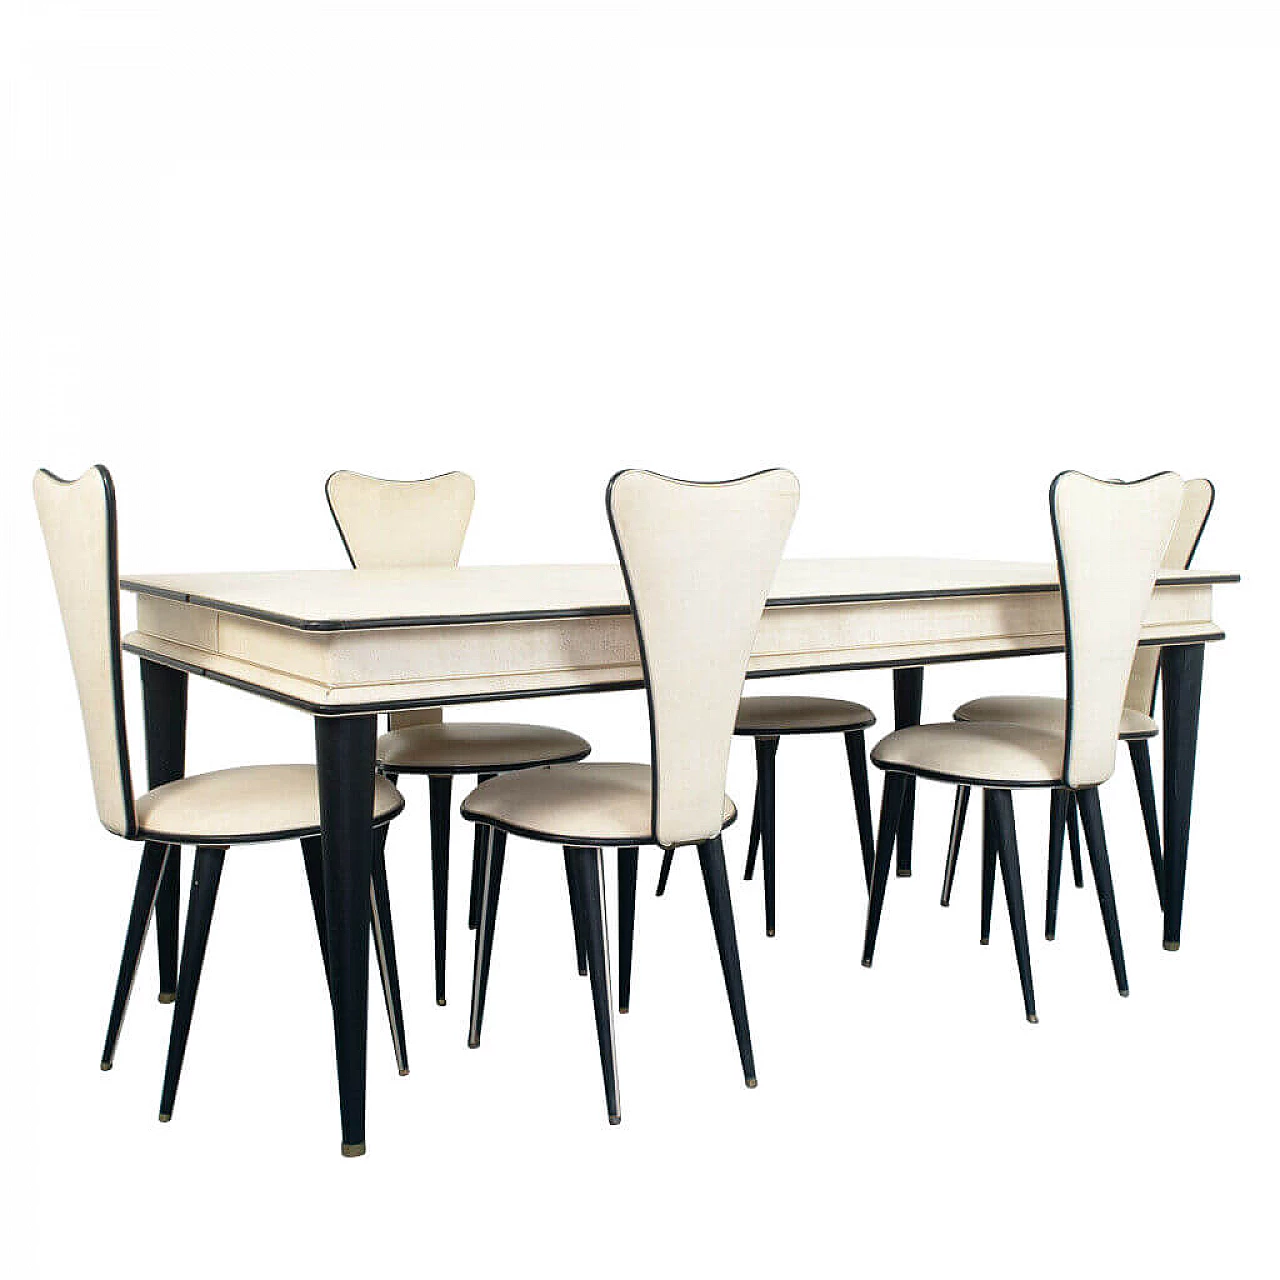 Dining table with 6 chairs by Umberto Mascagni, 1950s 1186879